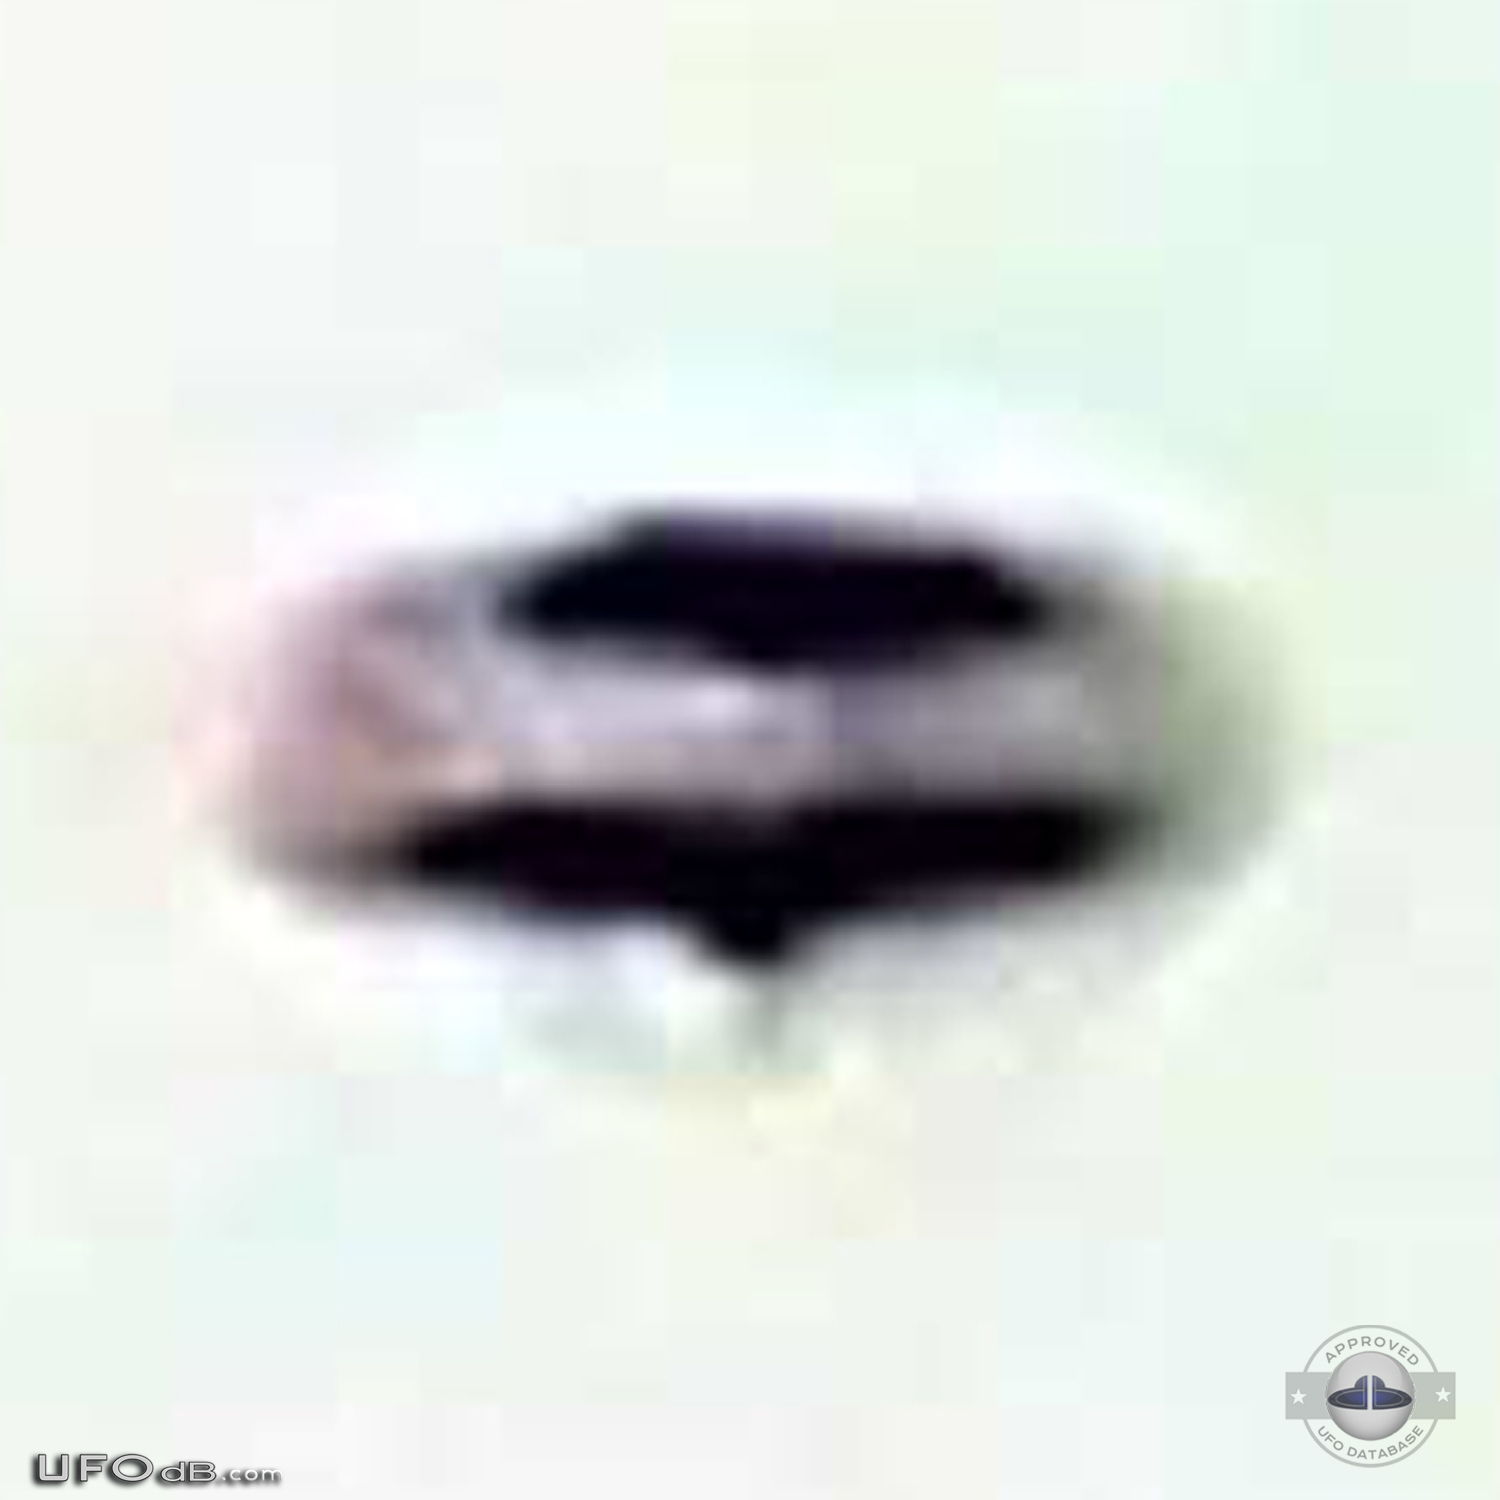 Man take picture of UFO he taught it was a blimp - Los Angeles 2011 UFO Picture #389-5